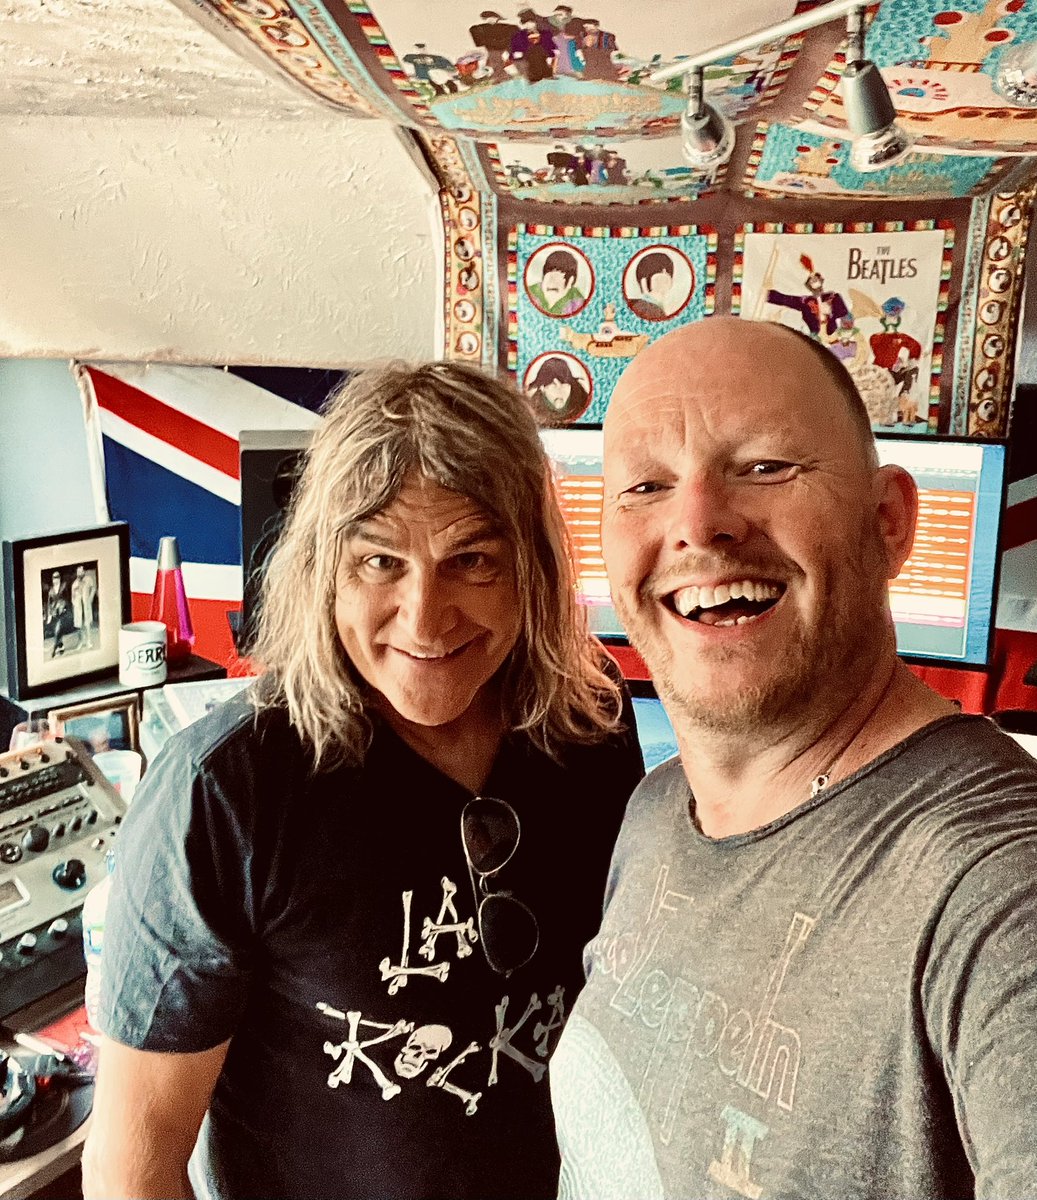 We had this young man in the studio today. Singer songwriter from Wales. He’s got some tidy tunes 😃@thealarm @PearlDrumCorp @PearlDrumsEuro @audenguitars @ZildjianCompany @zildjianGBI @CodeDrumHeads @ProRacketCases @vicfirth @Tonuspomus @markbutcher72 @WoodmanGav @julespeters